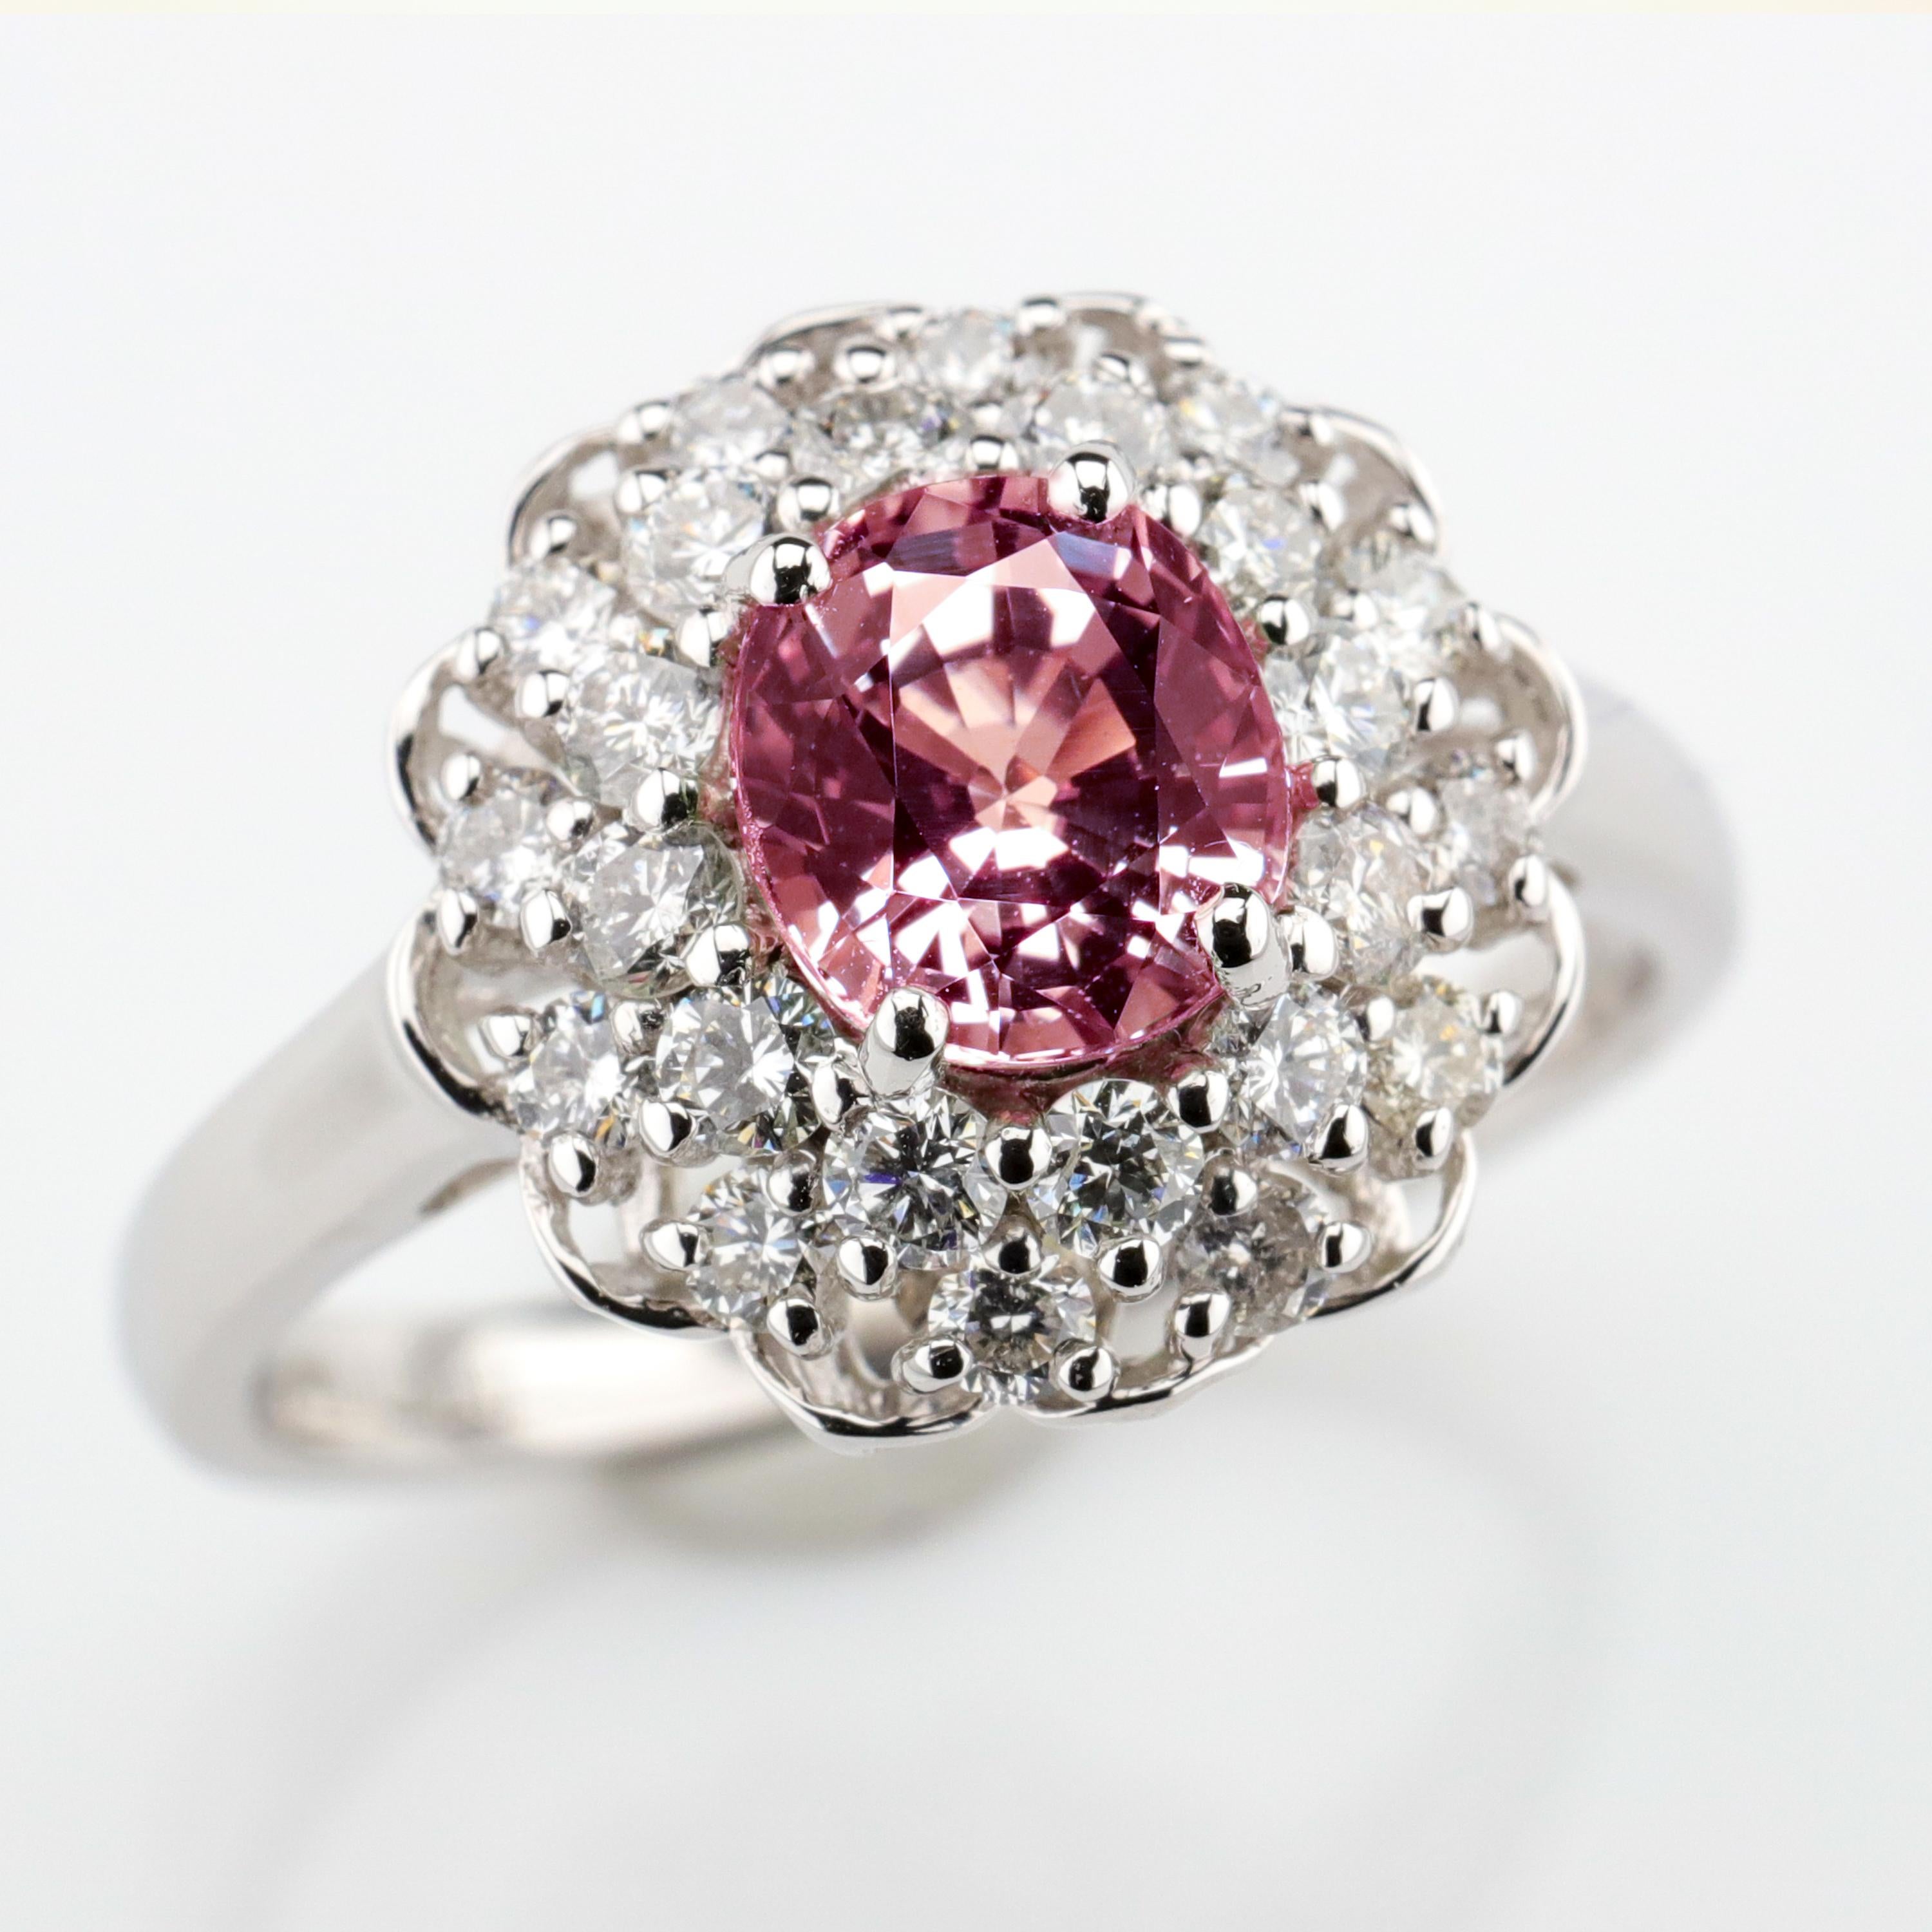 Alexandrite Ring with Diamonds is Rare Even Among Alexandrite Rings at ...